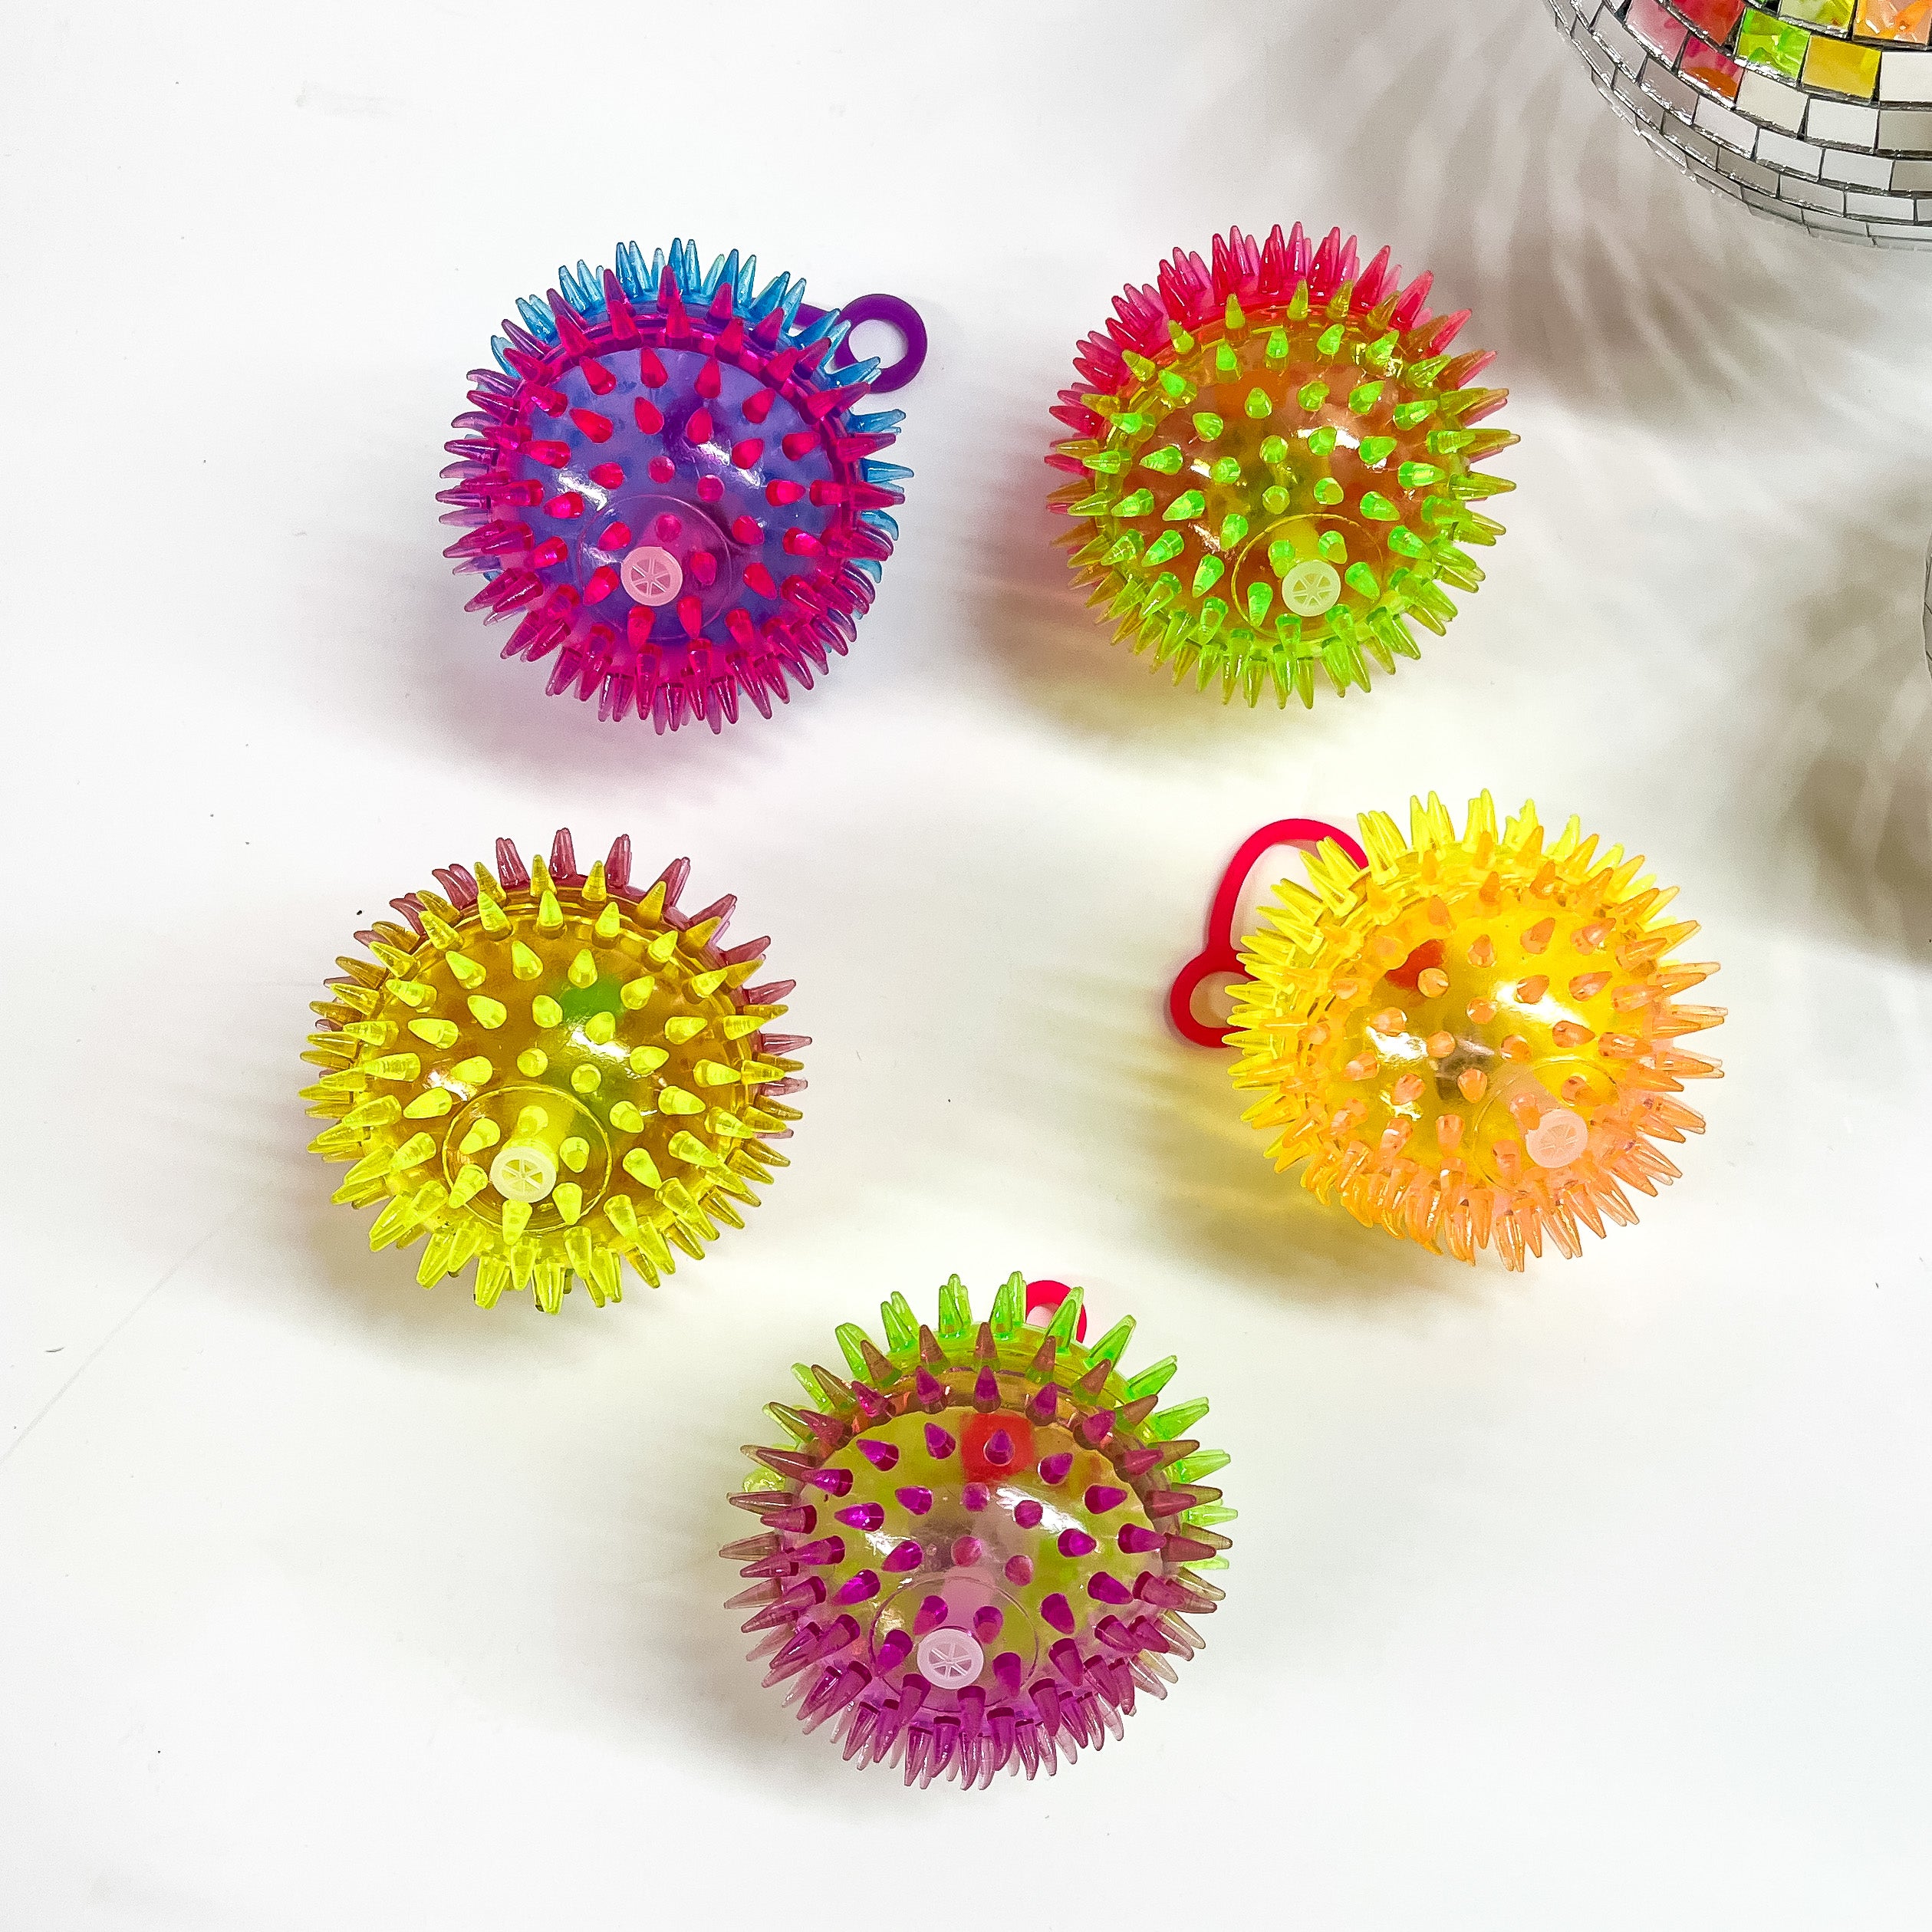 There are five spike balls with different color combinations, all spike balls comes with a stretchy finger holder and all spike balls have a ligt inside. These spike balls are taken on a white background with a disco ball in the corner as decor.